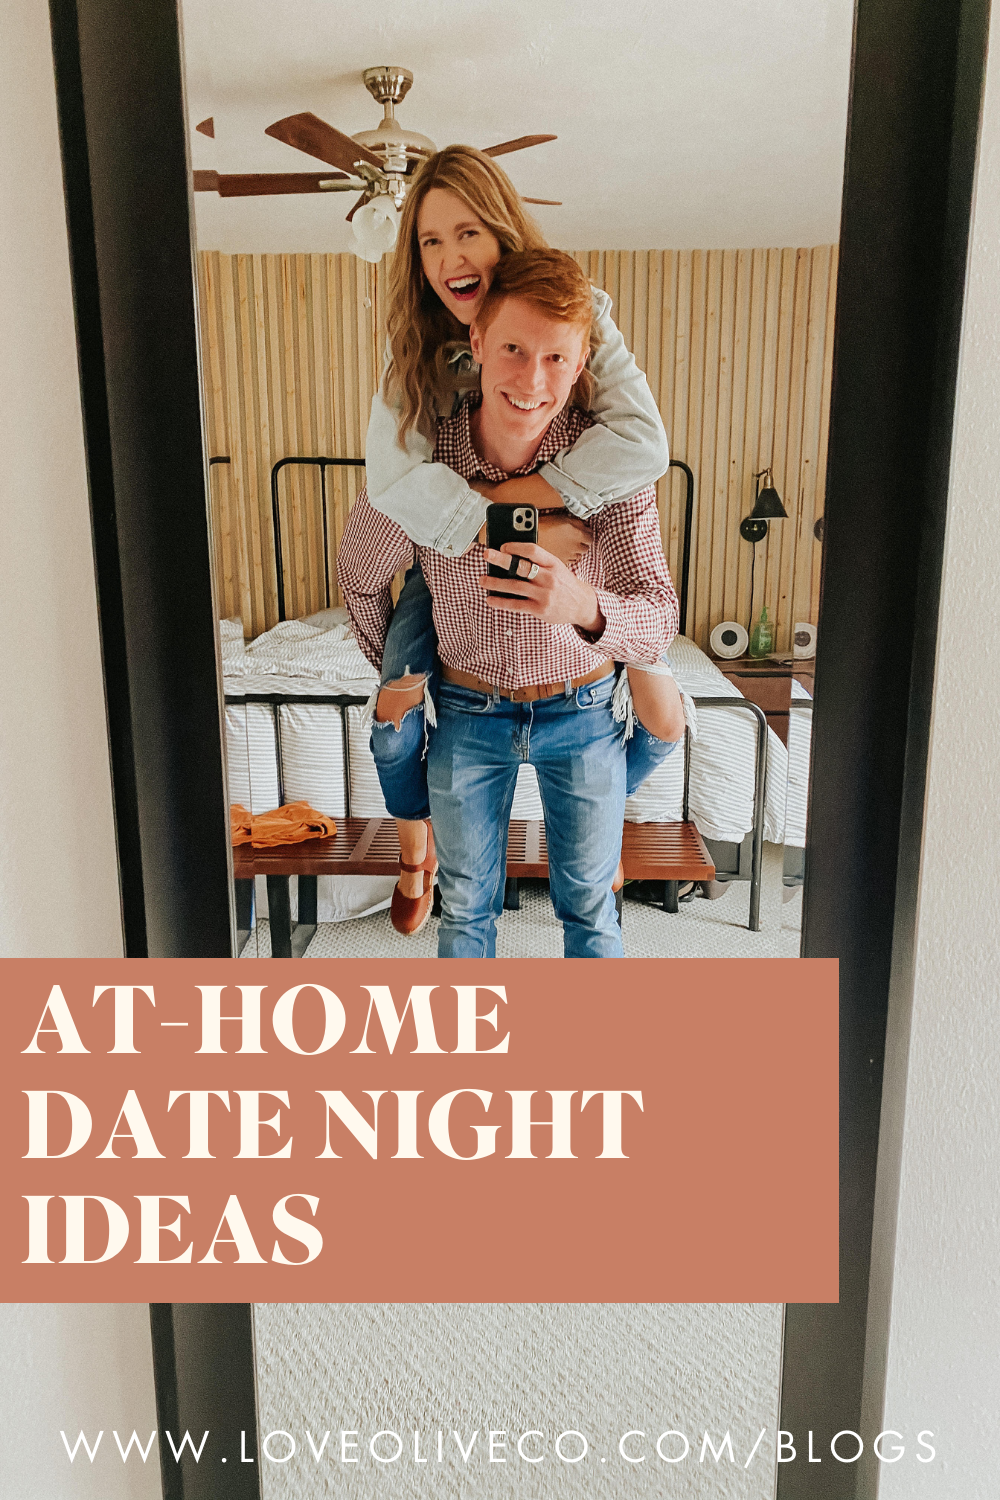 5 Valentine's Day At-Home Date Ideas